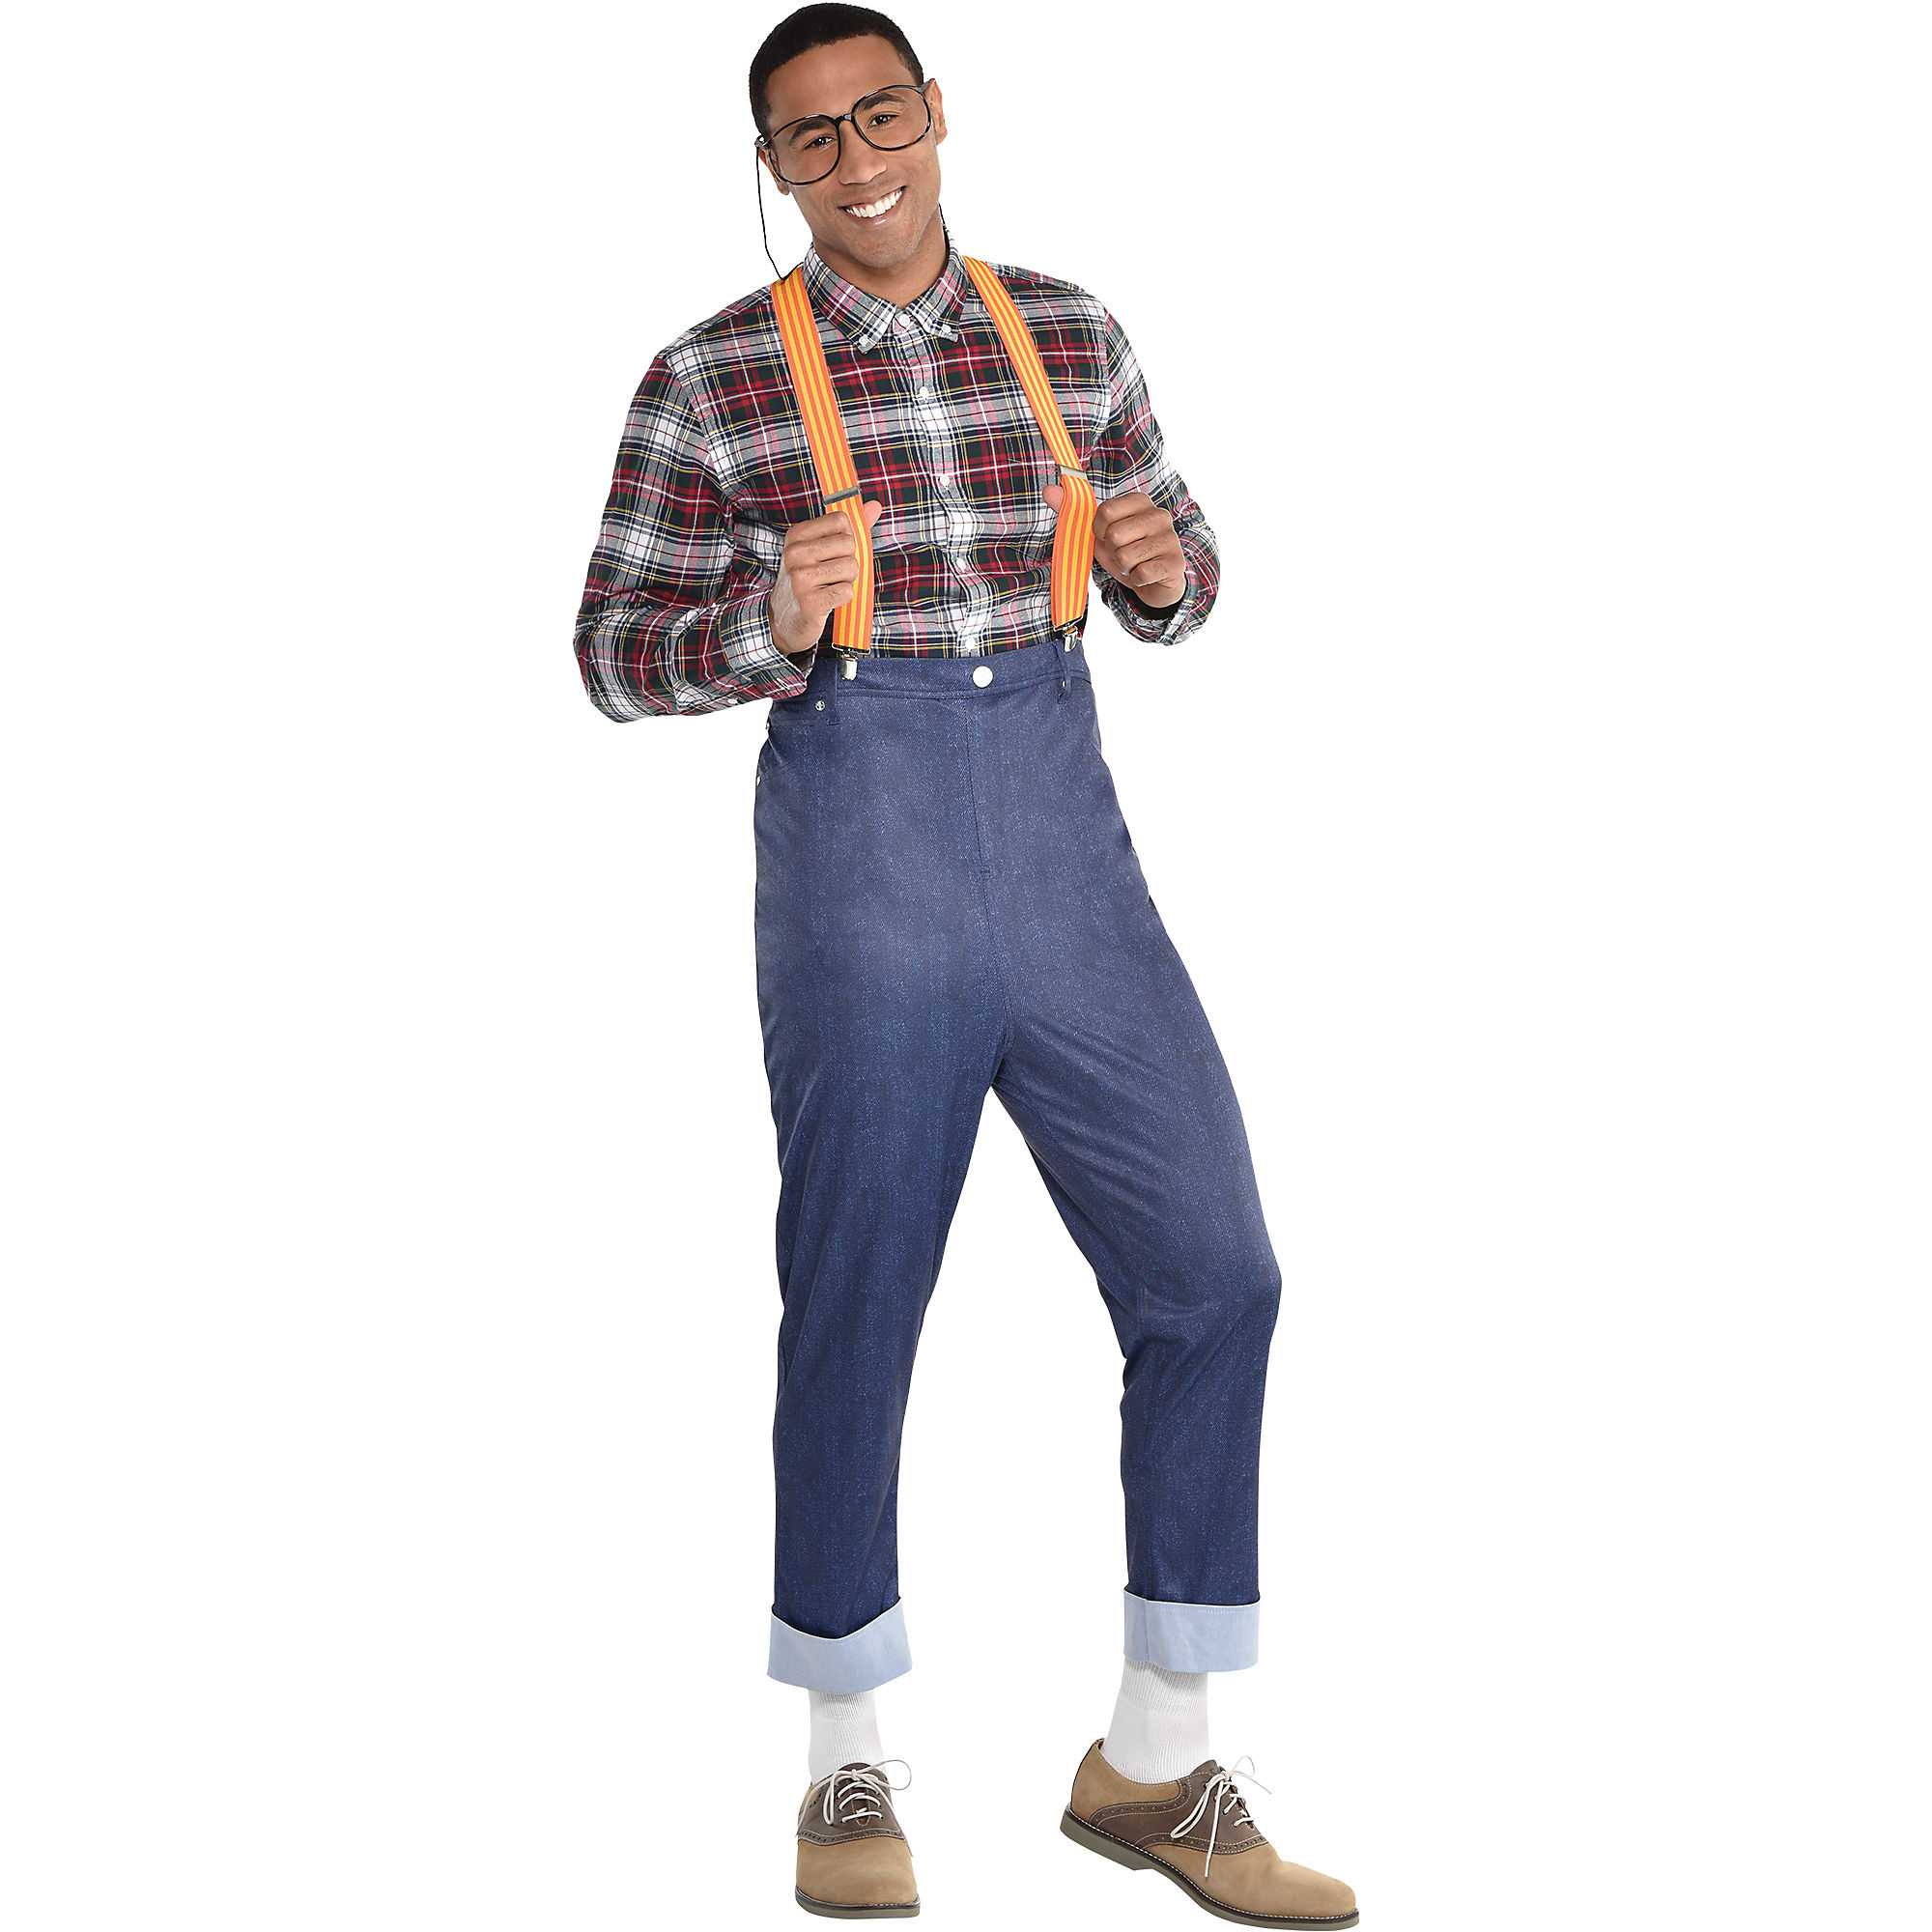 Party City Neighborhood Nerd Halloween Costume Kit for Adults Includes Pants, Glasses, Suspenders - image 1 of 1